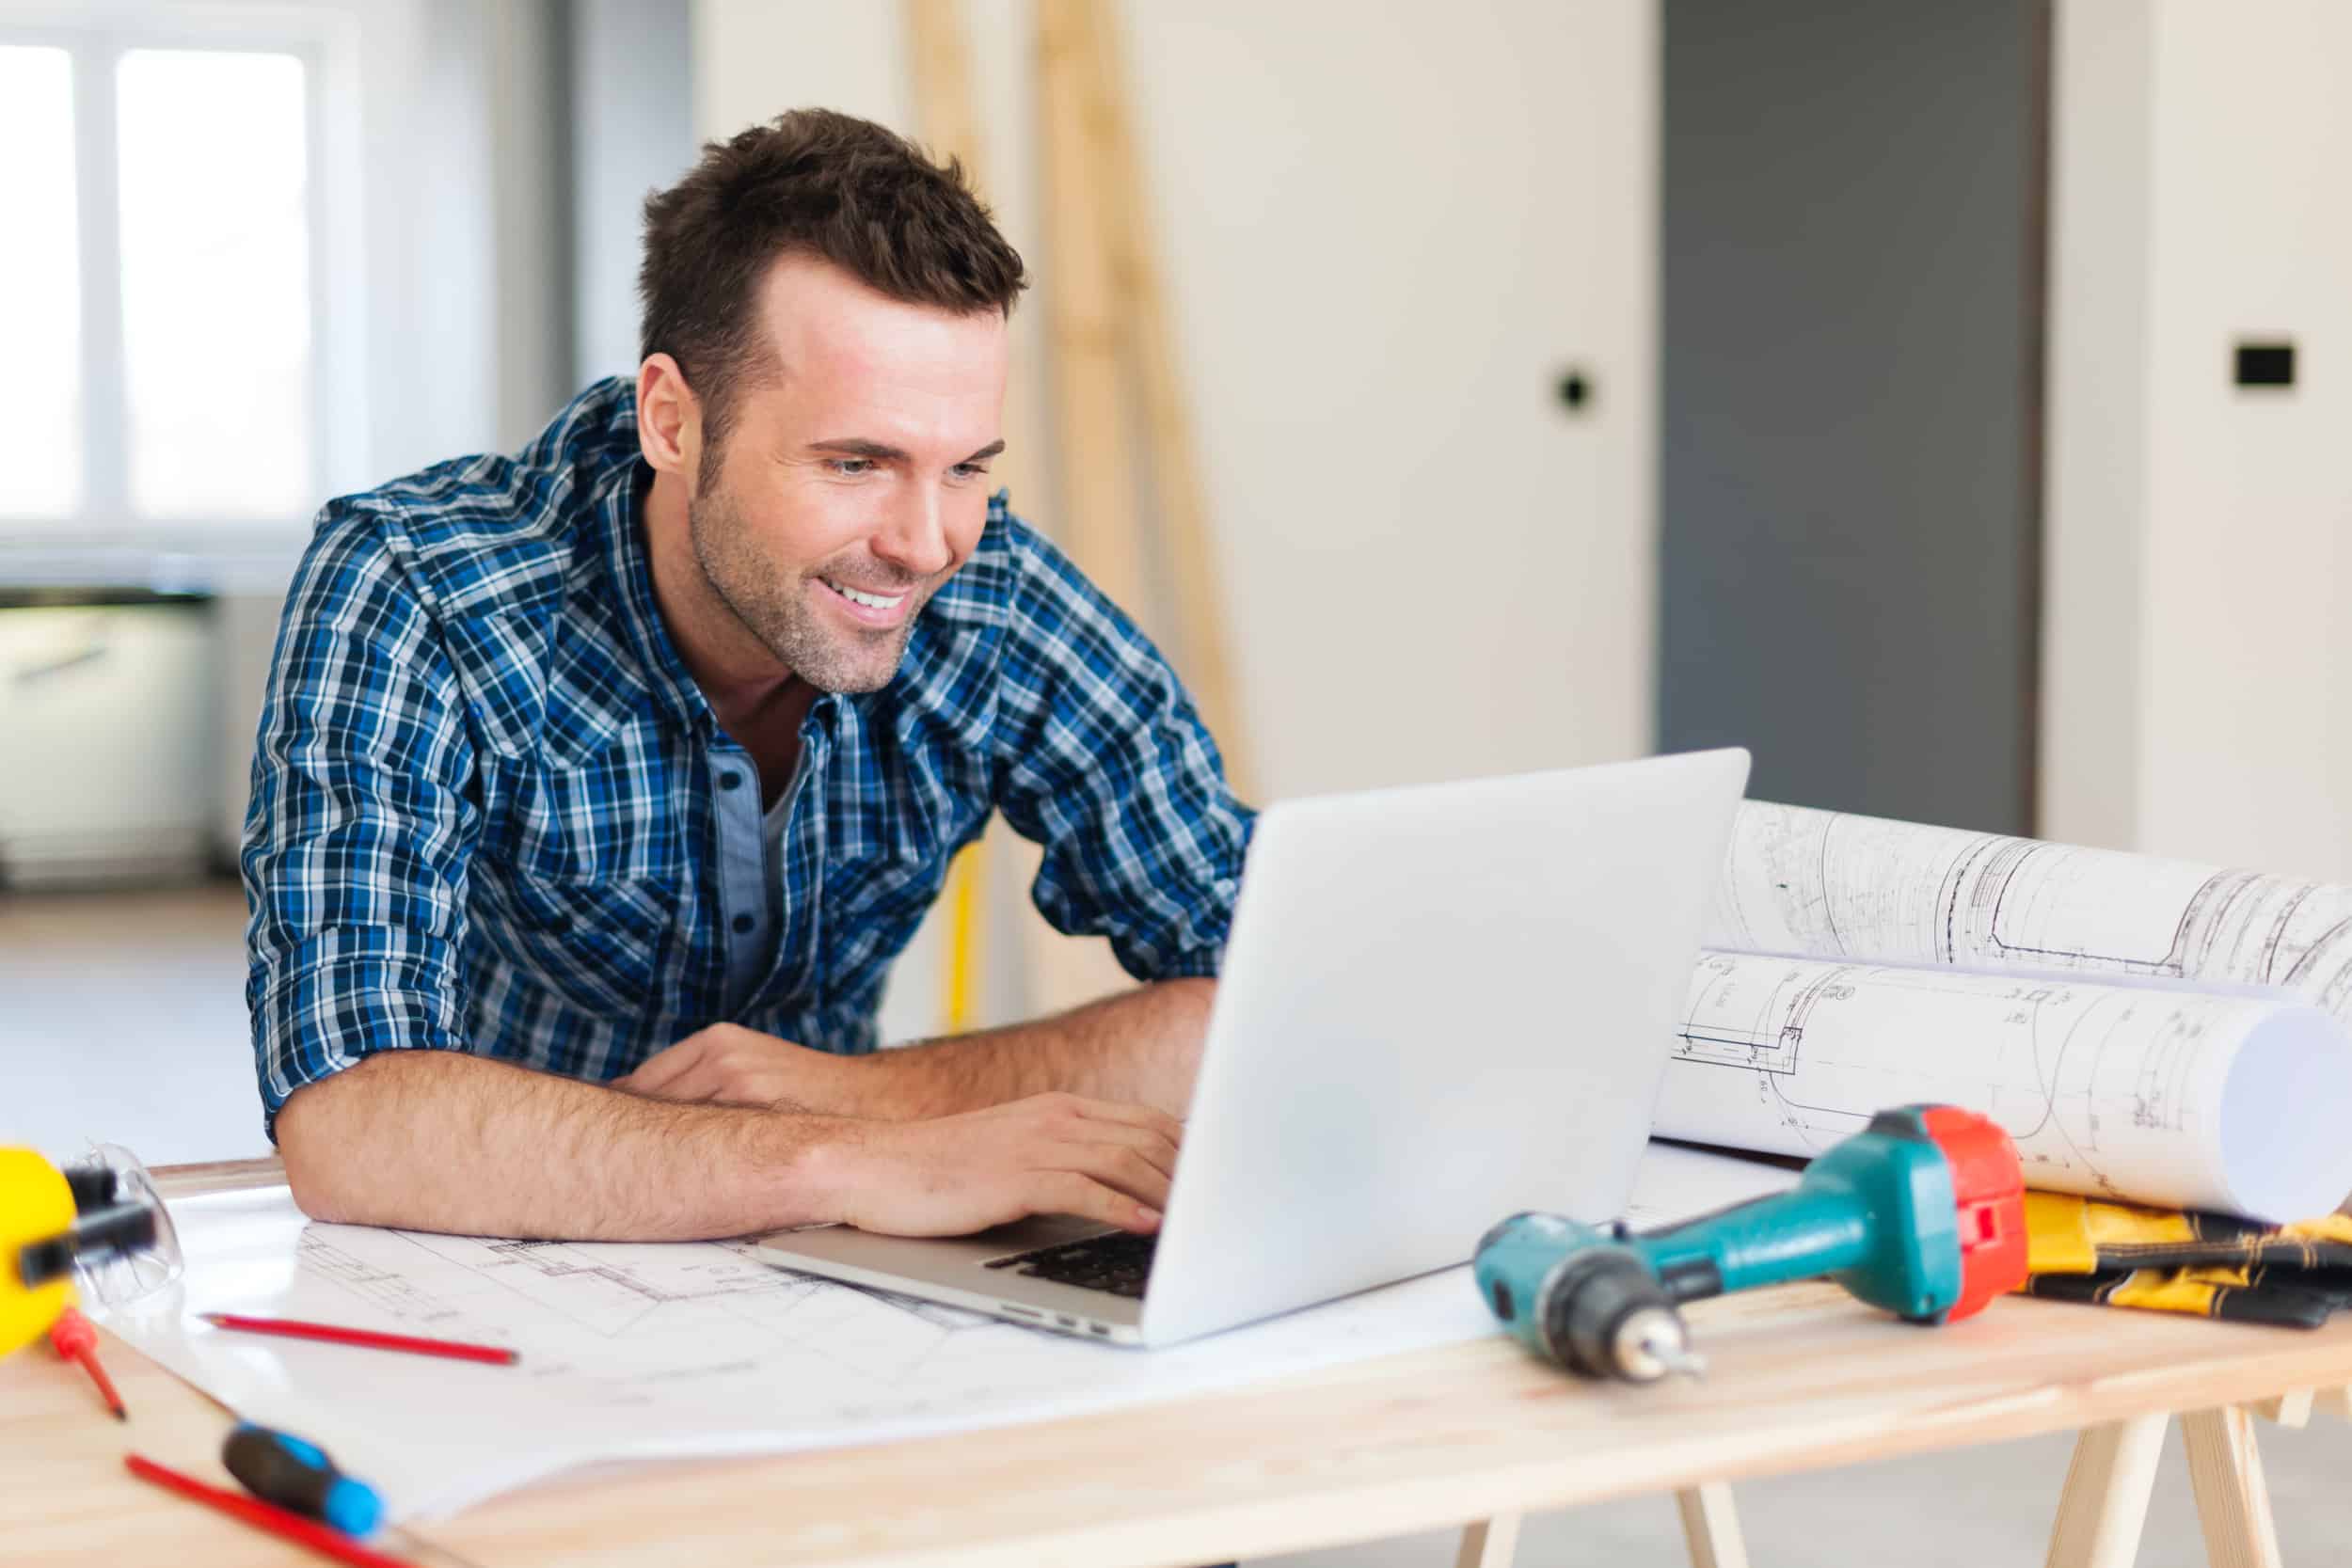 smiling-construction-worker-working-with-laptop-DBEML6Q_reach-company-business-website-marketing-and-seo-messaging